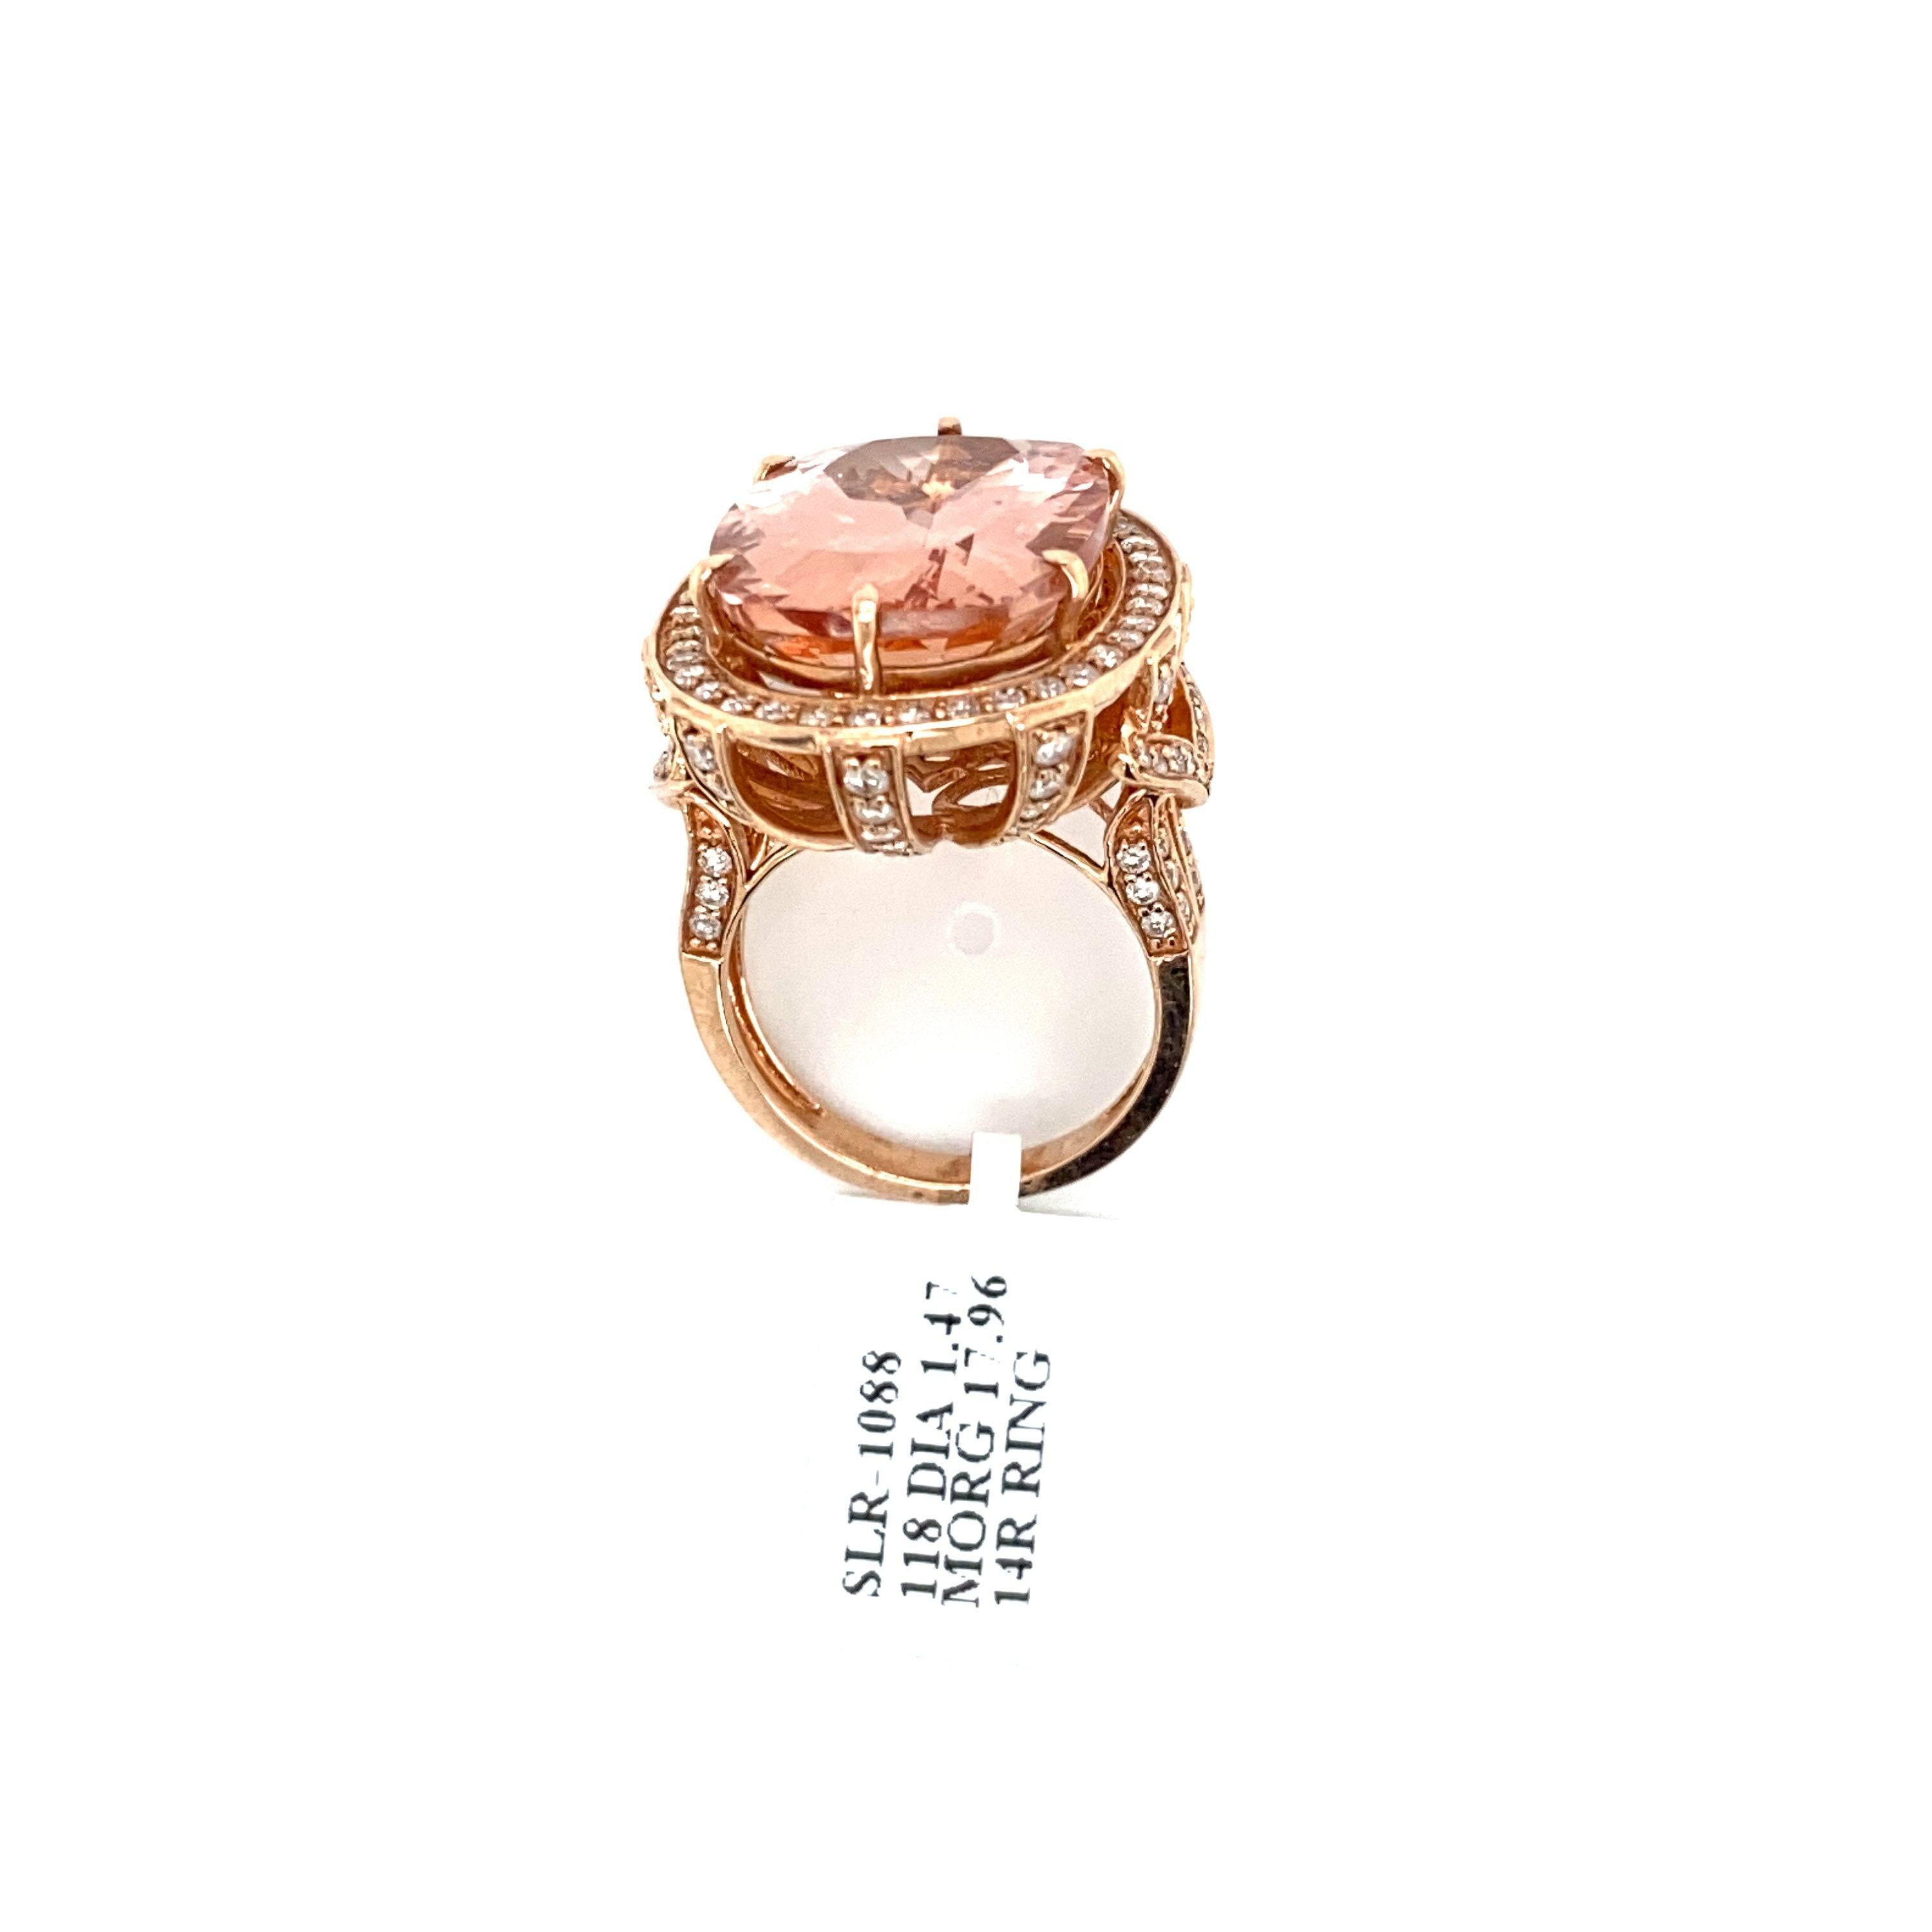 This stunning natural morganite and diamond encrusted ring is set in solid 14K rose gold. The natural 17.96 Ct cushion cut morganite has an excellent peachy pink color and is surrounded by a halo of round cut white diamonds. The ring is stamped 14K